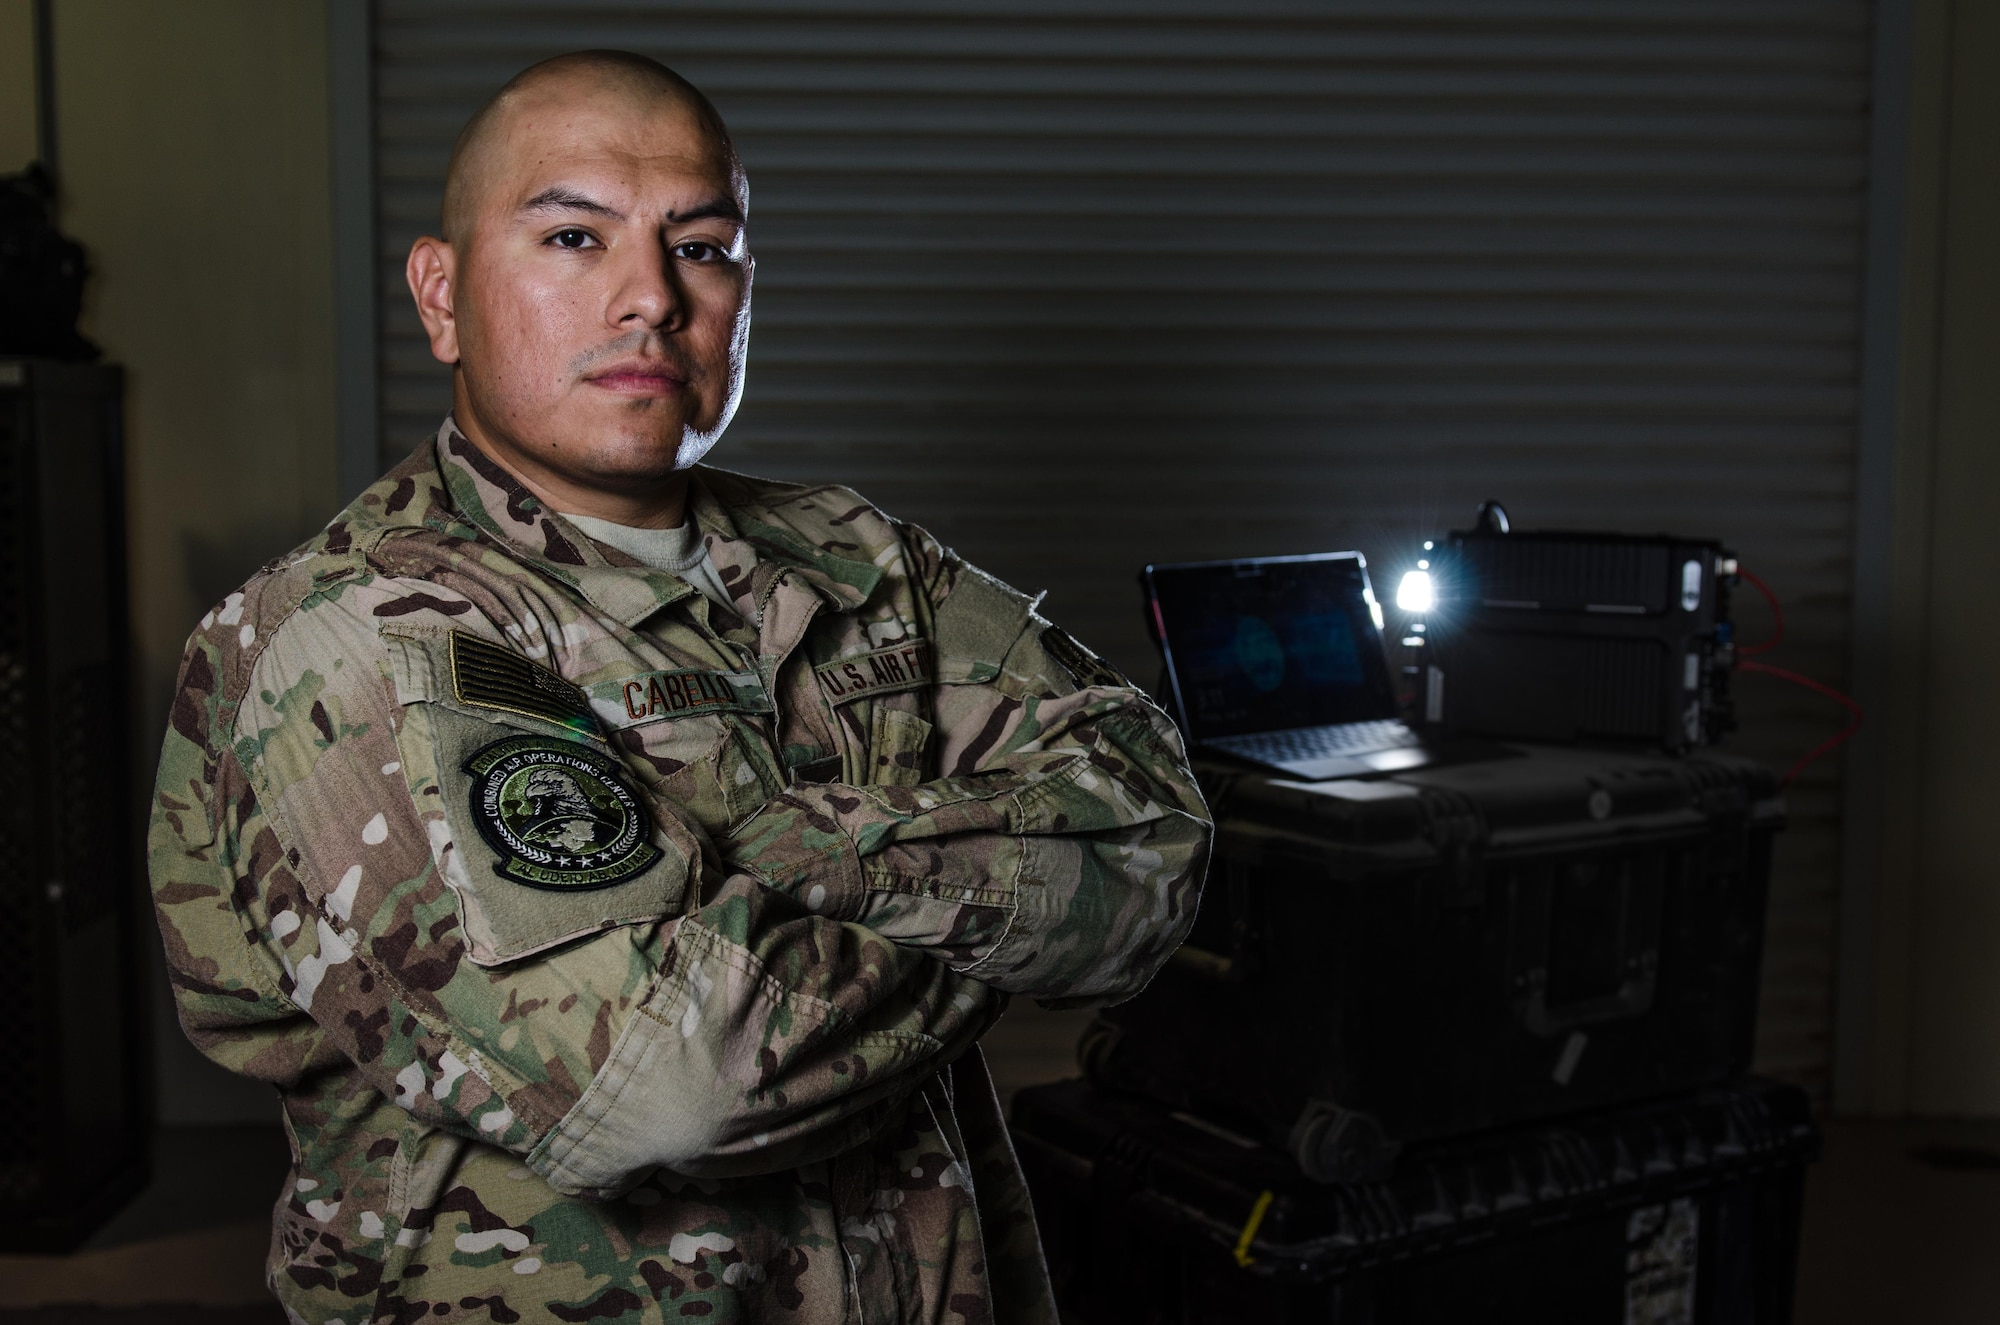 U.S. Air Force Tech. Sgt. Albert Cabello,the 609th Expeditionary Air and Space Communications Squadron NCO in charge of executive communications at the Combined Air Operations Center, stands in front of the new executive  communications kit Aug. 1, 2017, at Al Udeid Air Base, Qatar. The kit provides secure command and control network communications for key Air Force leaders via commercial medians and to offers voice, video, e-mail, and data services anywhere in the world. (U.S. Air Force photo by Staff Sgt. Alexander W. Riedel)